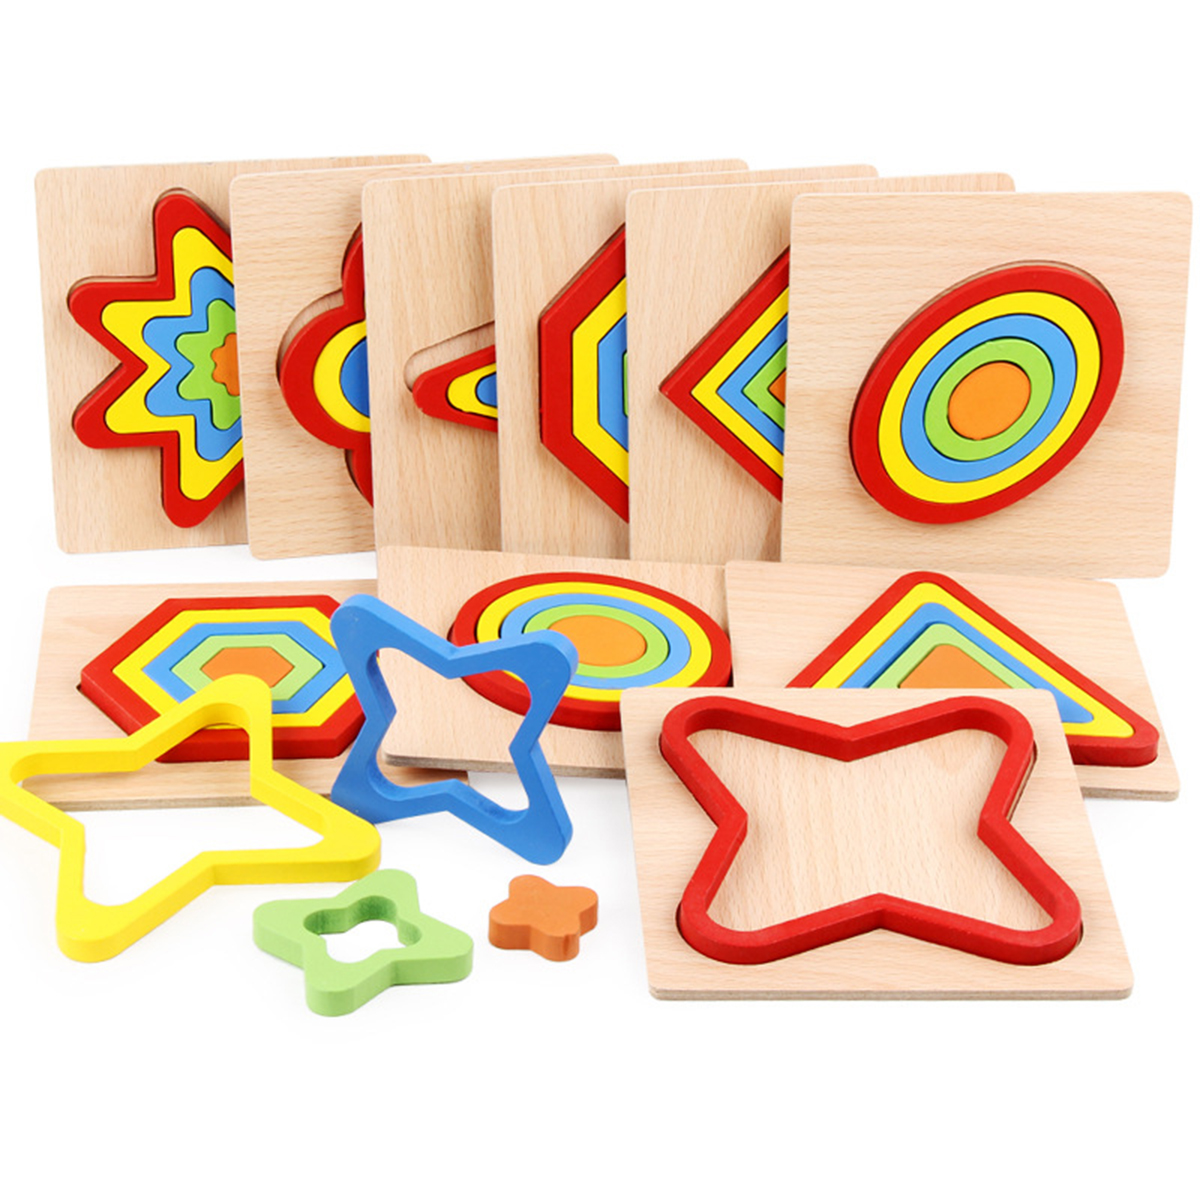 Shape Cognition Board Geometry Jigsaw Puzzle Wooden Kids Educational Learning Toys 6